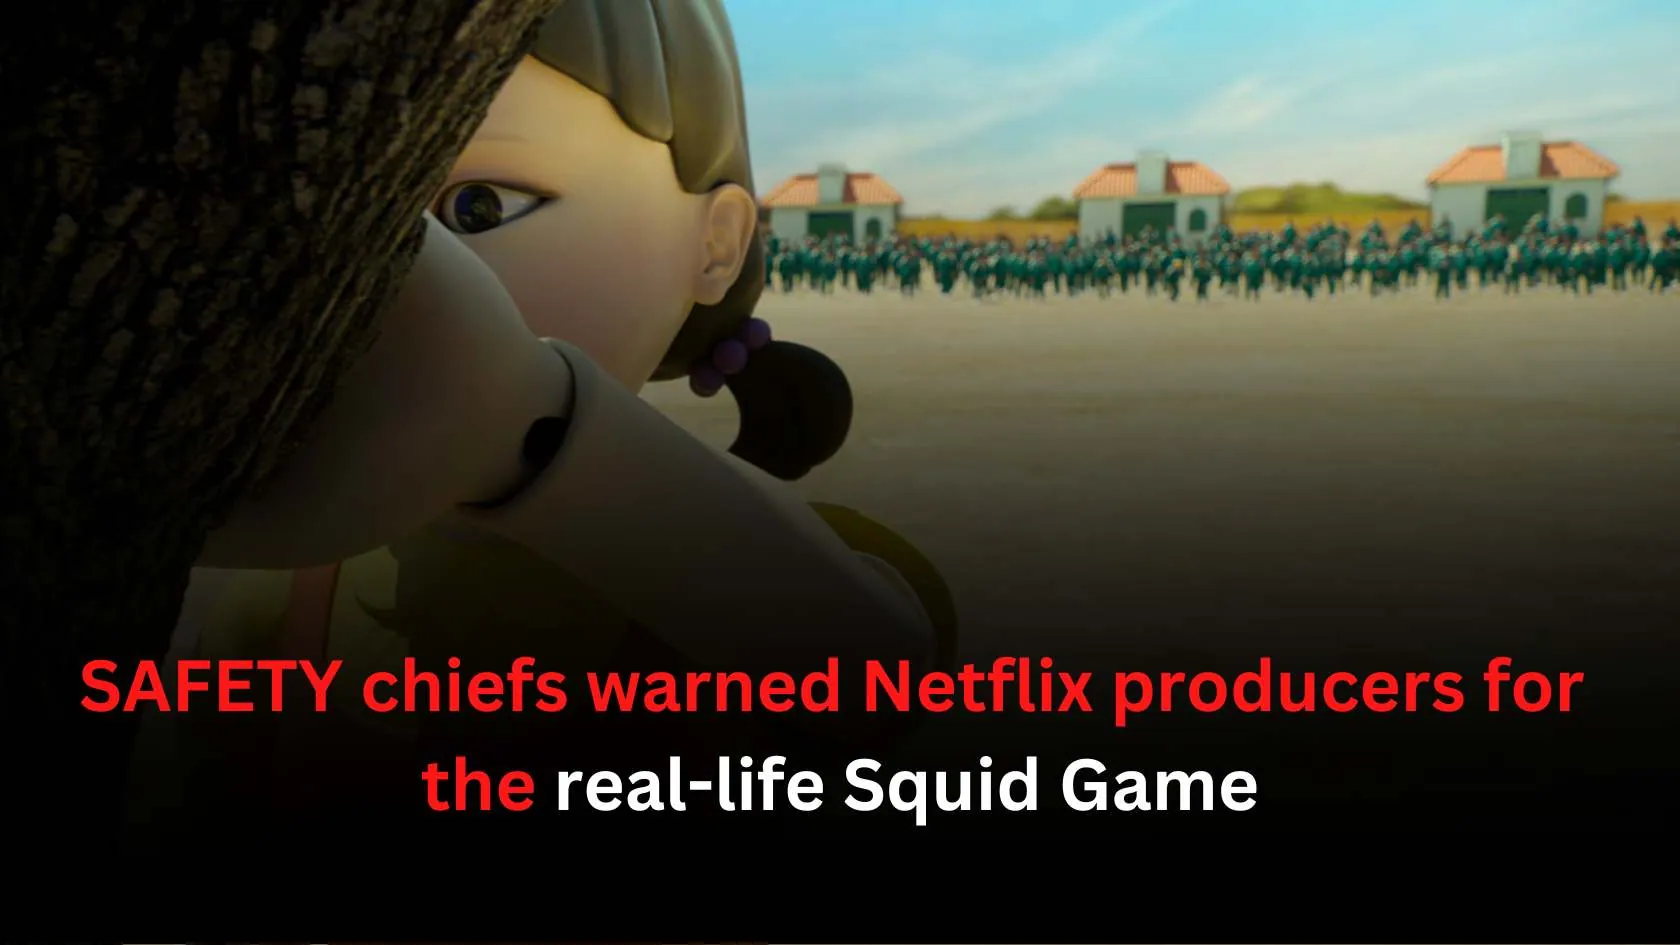 SAFETY chiefs warned Netflix producers about the real-life Squid Game